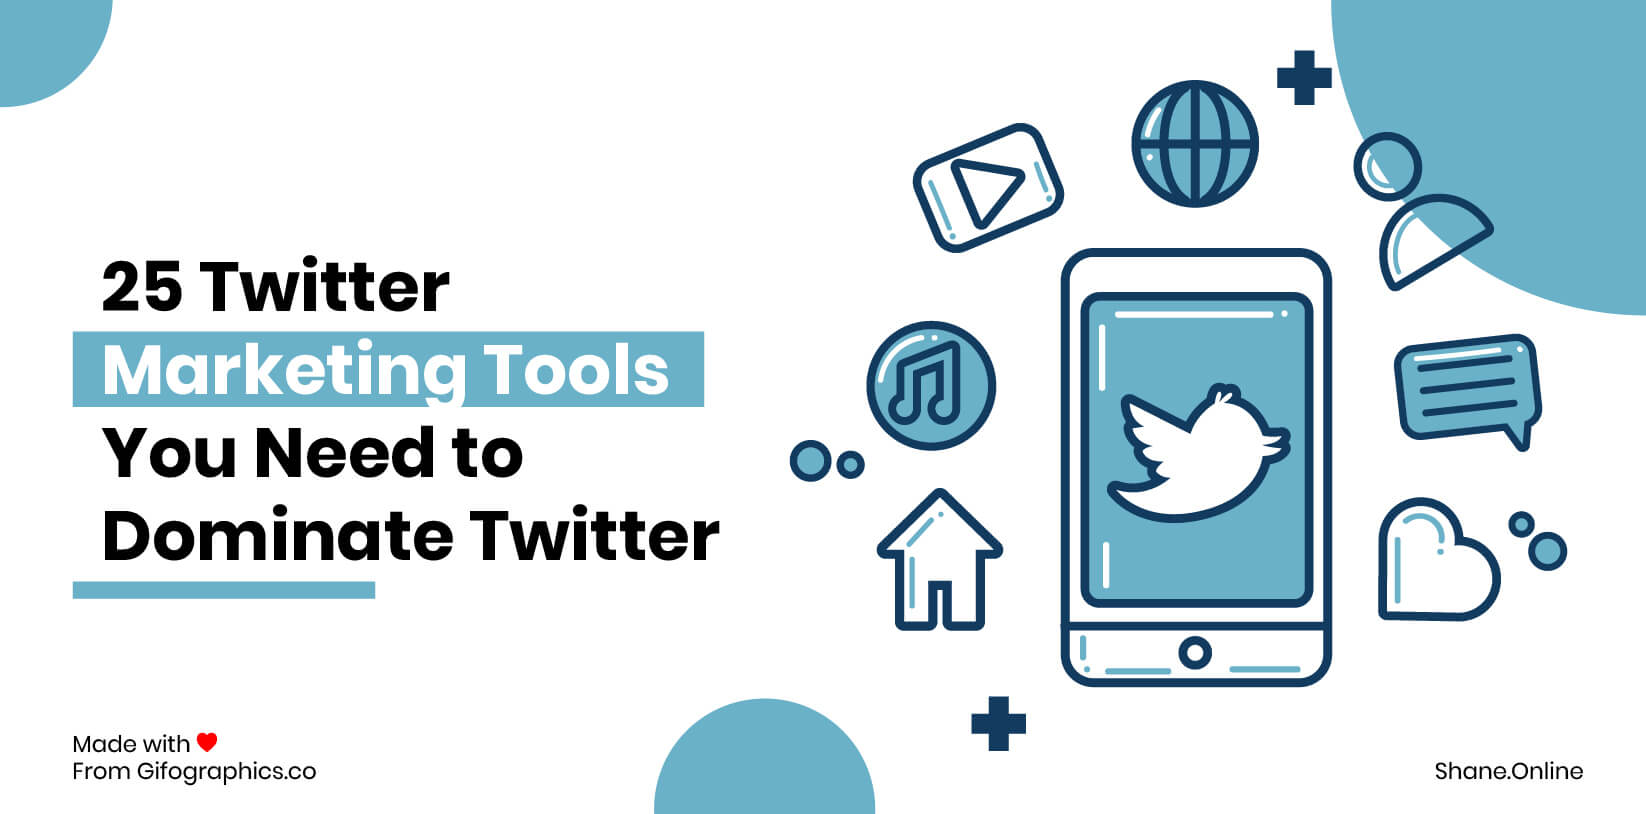 24 Twitter Marketing Tools You Need to Dominate Twitter in 2023